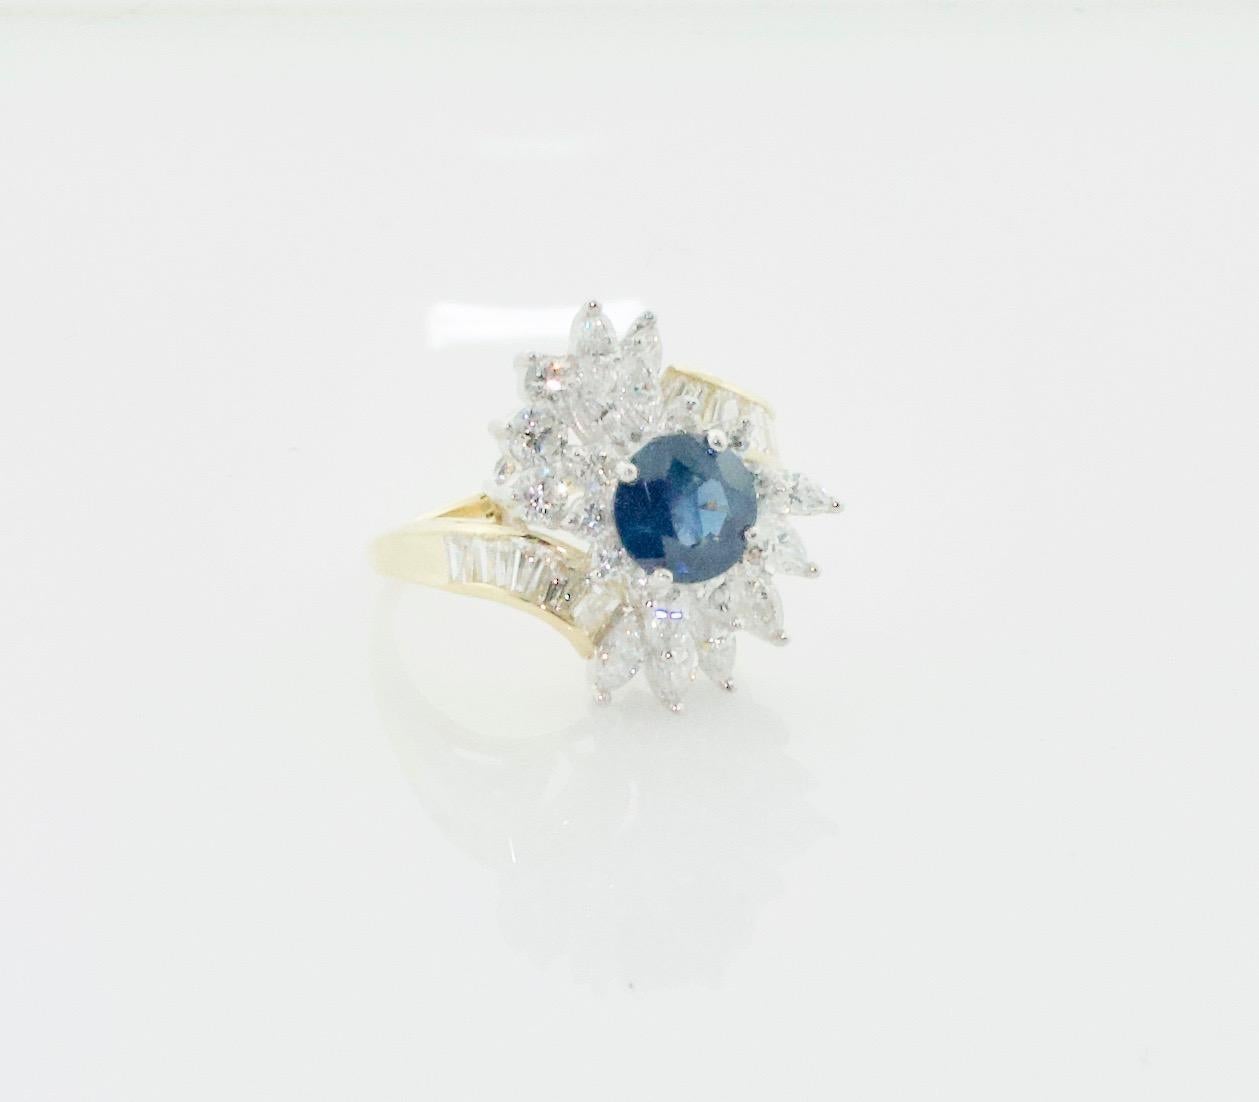 Sapphire and Diamond Cocktail Ring by Terrell & Zimmelman Circa 1970's

Indulge in the ultimate expression of luxury with the Lady's 18K Yellow & White Gold Sapphire/Diamond 